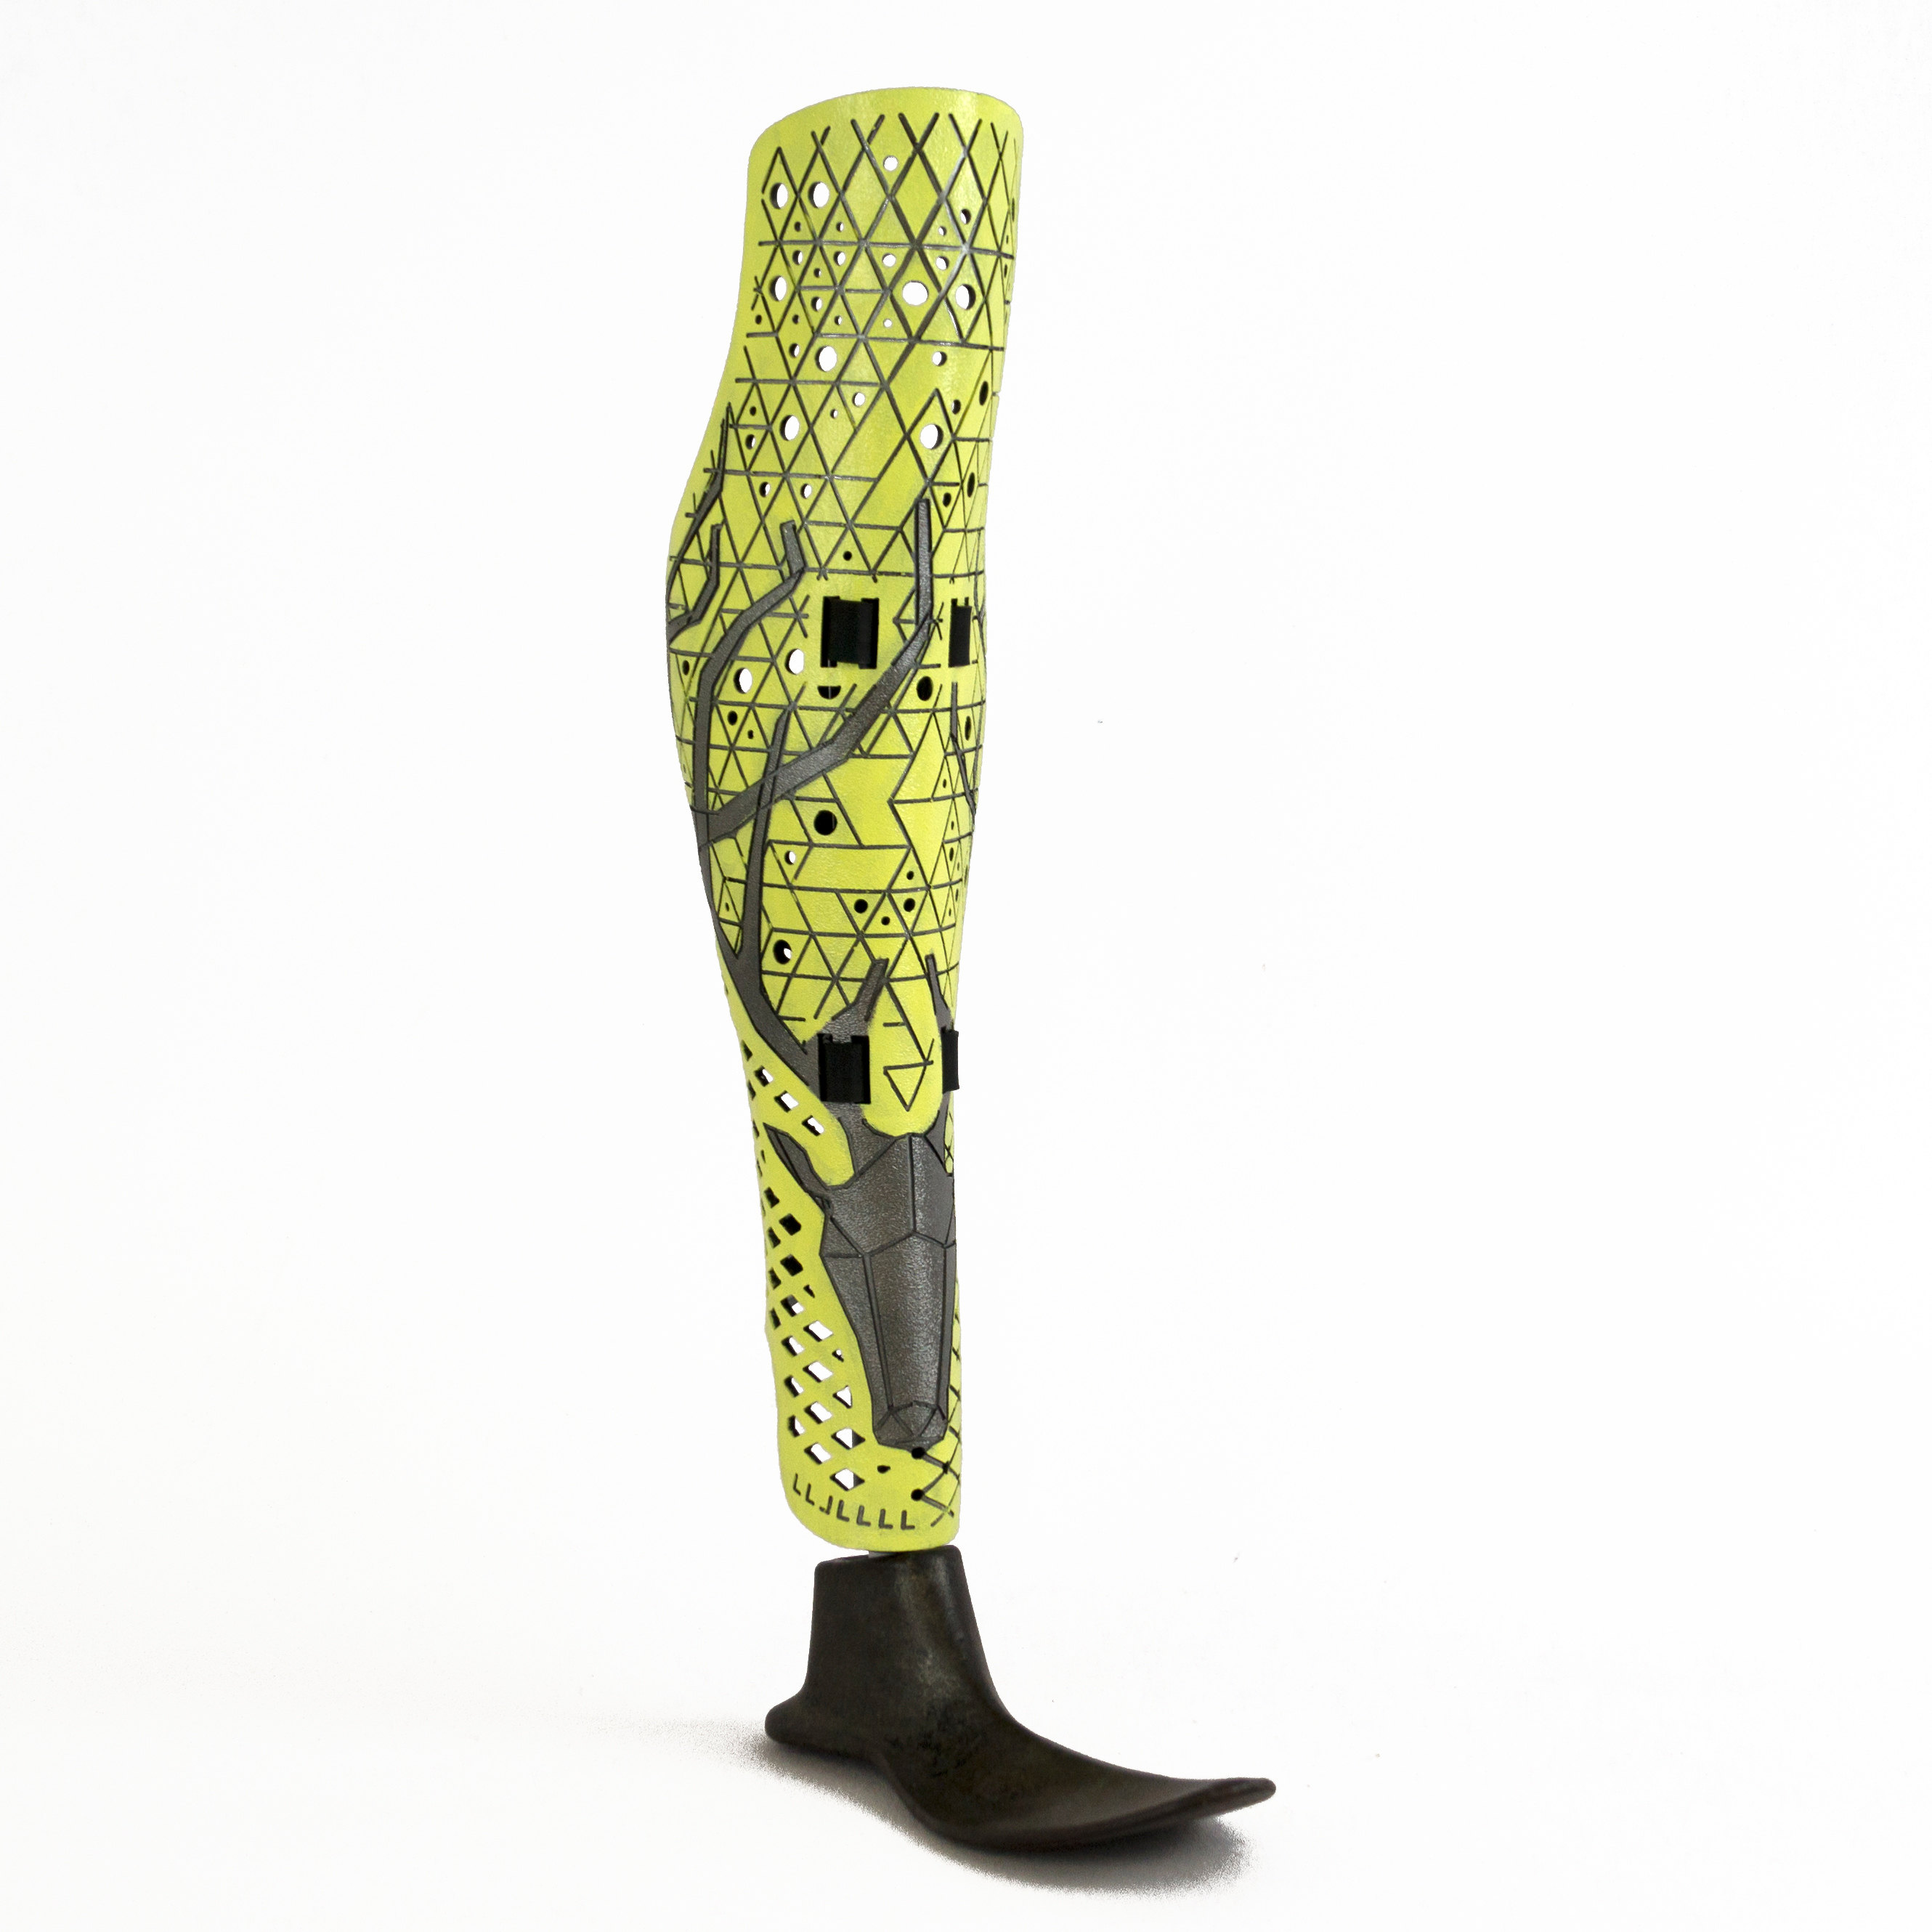 Neon, patterned cover for a prosthetic leg.